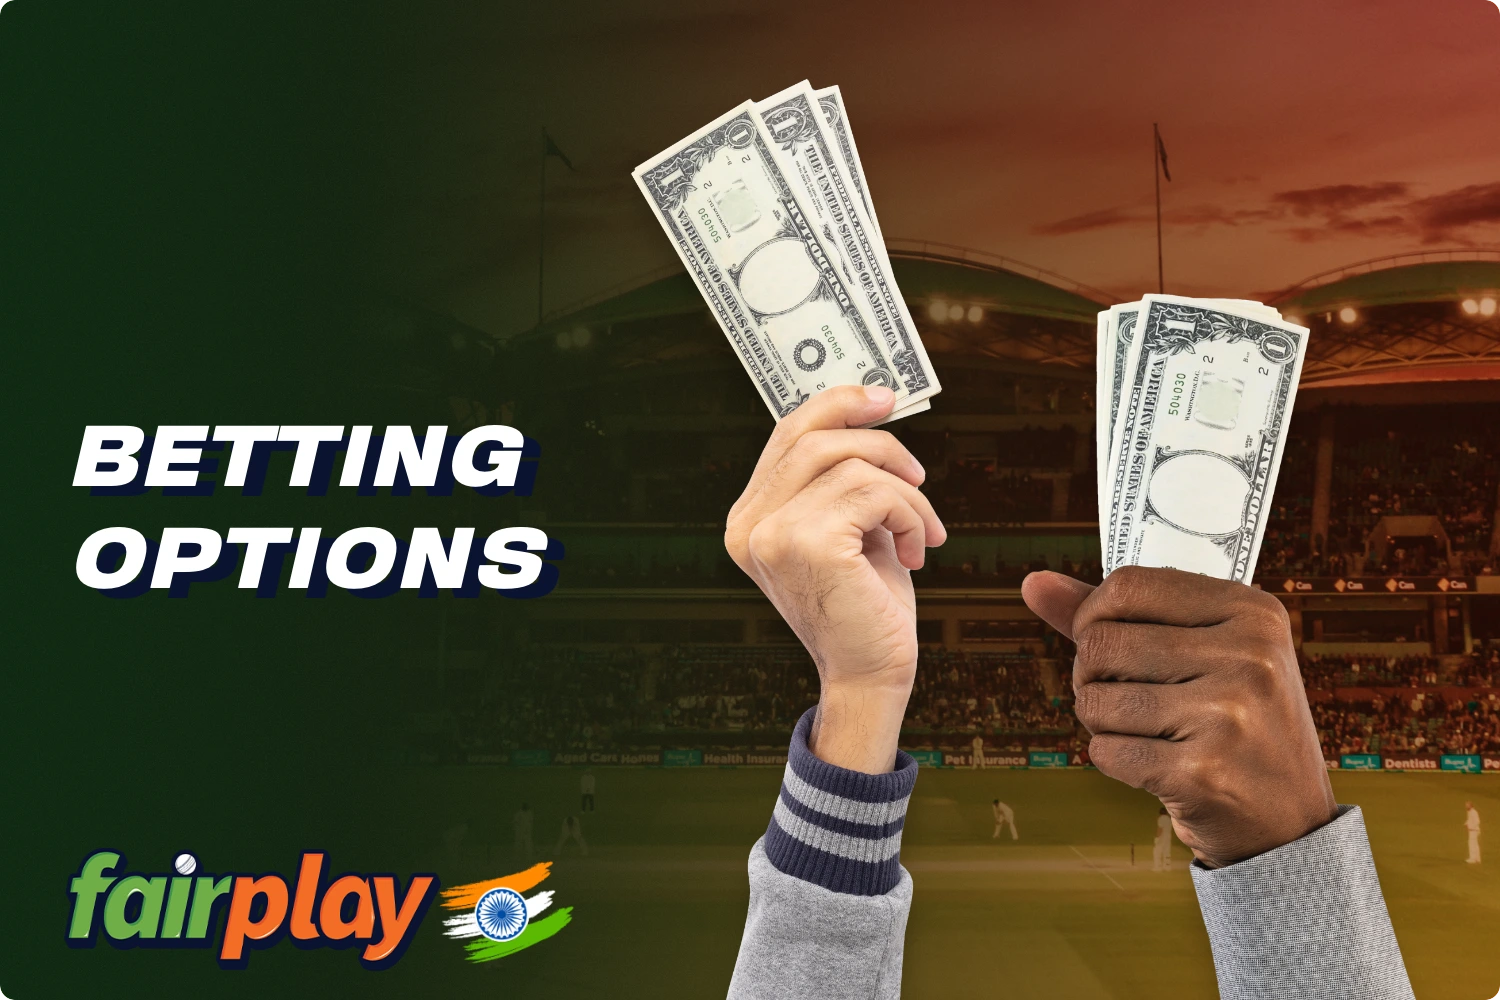 At Fairplay, users have a variety of sports betting options available to them